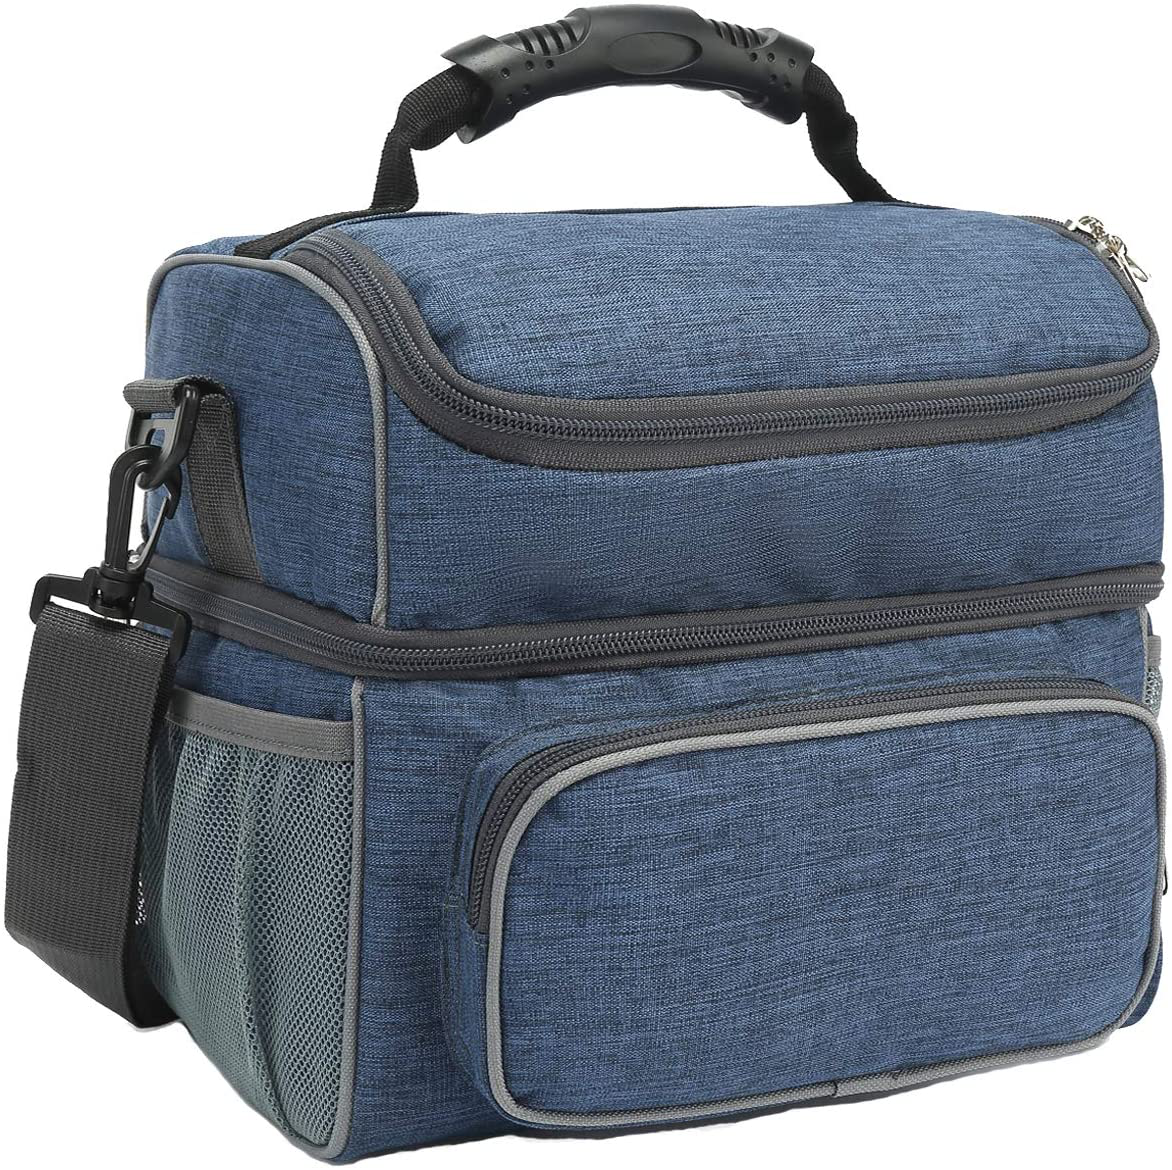 FlowFly Double Layer Cooler Insulated Lunch Bag Adult Lunch Box Large Tote Bag for Men, Women, With Adjustable Strap,Front Pocket and Dual Large Mesh Side Pockets,Navy